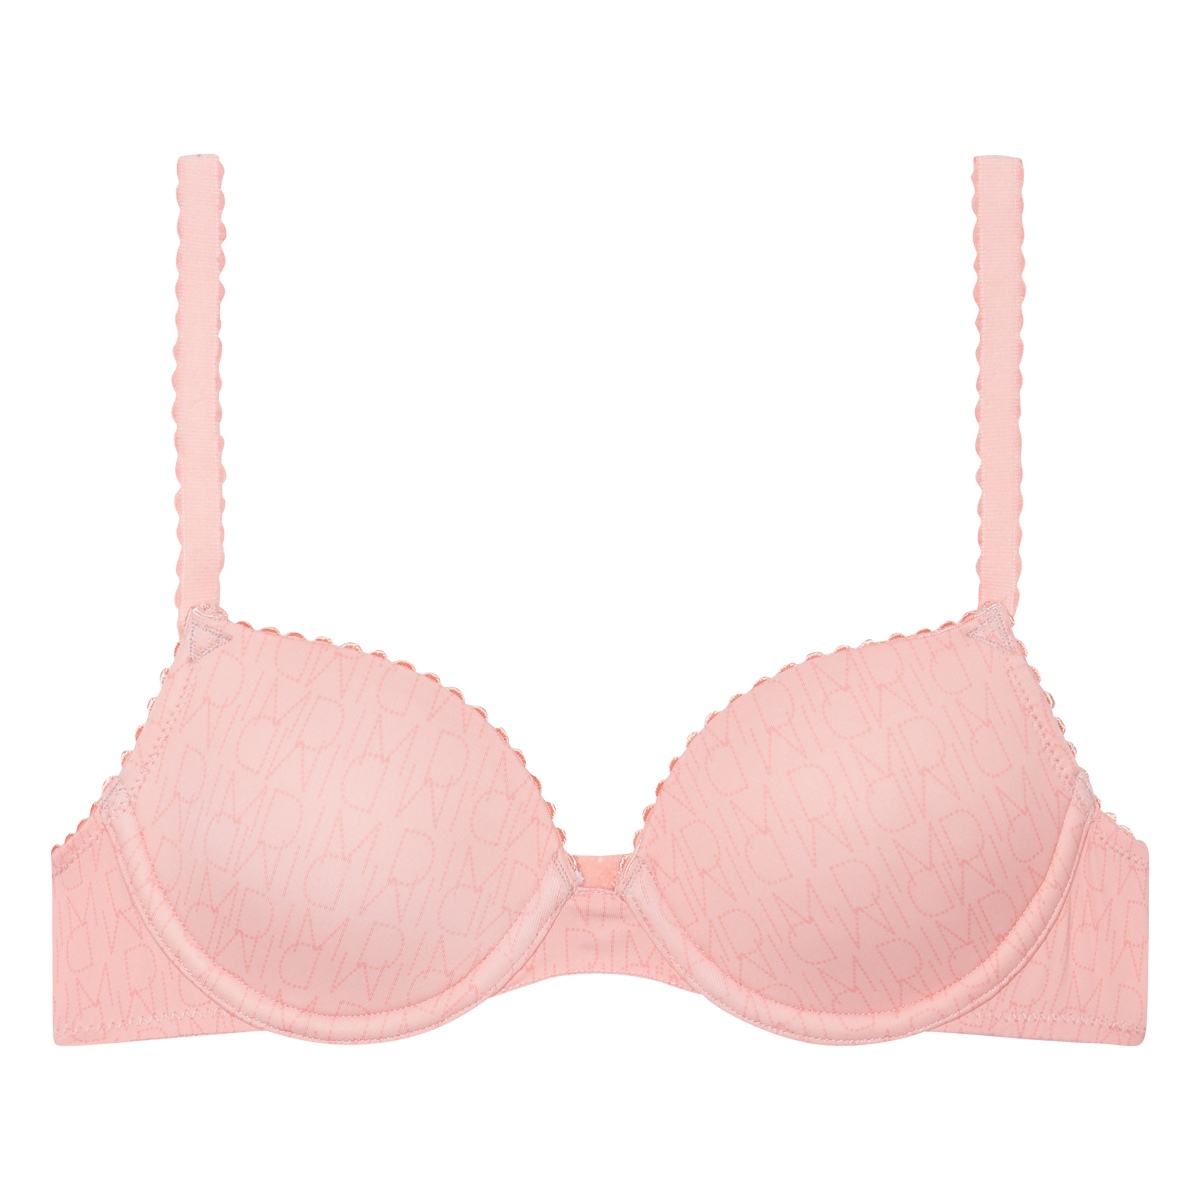 Buy Blush Bras for Women by MAX Online